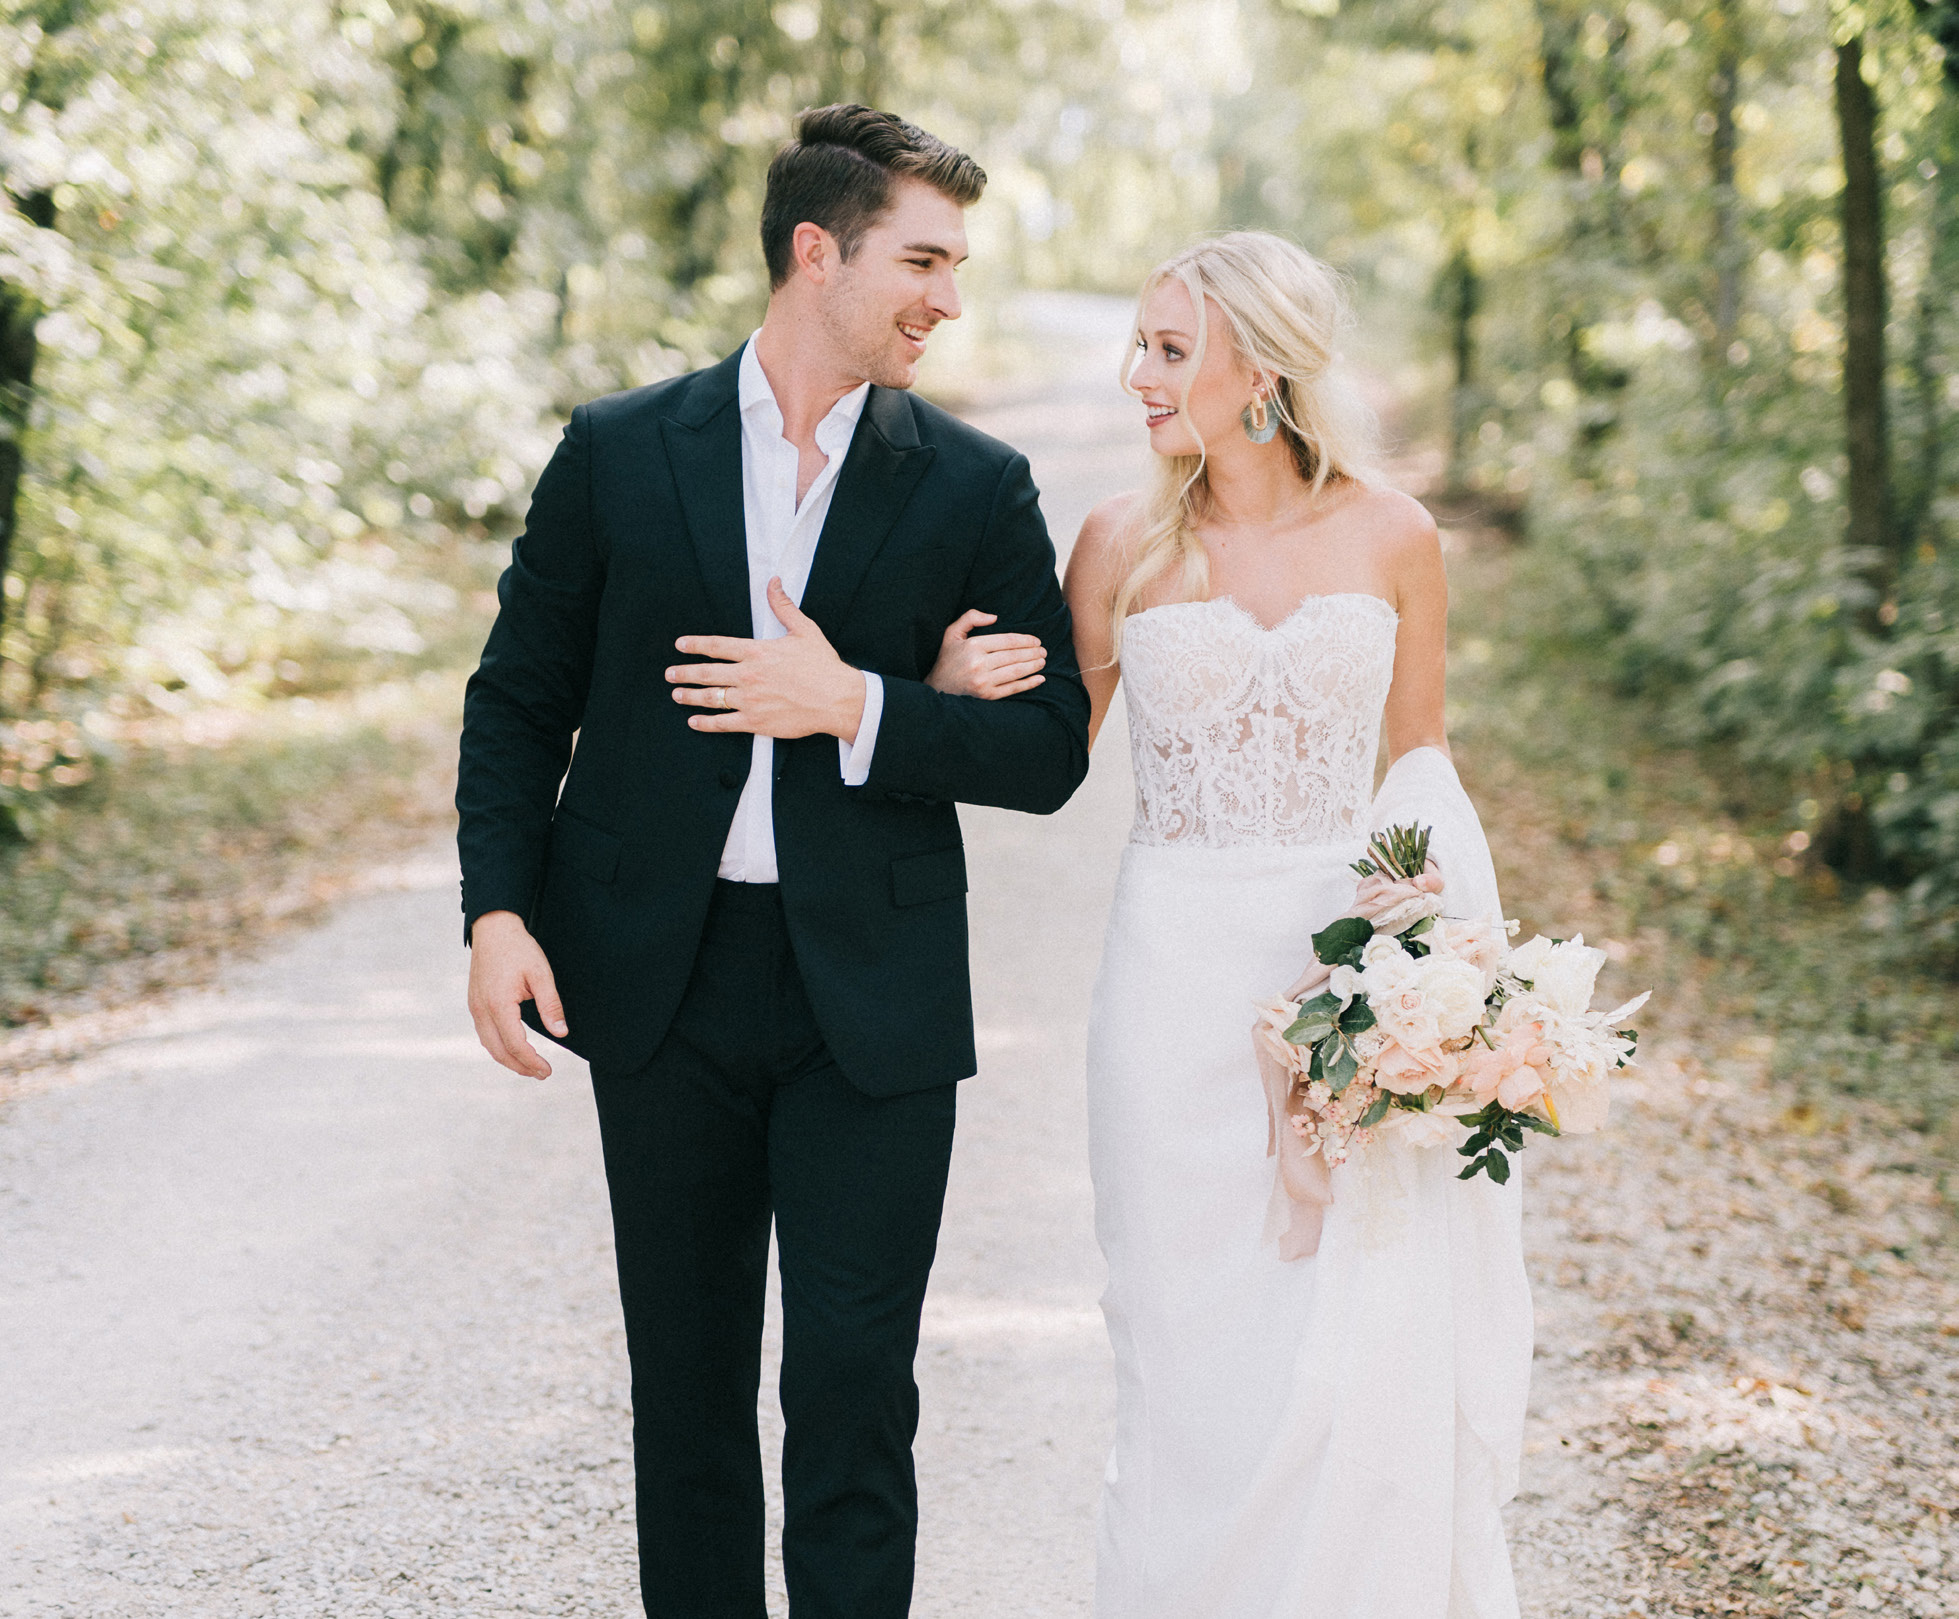 A Rustic Contemporary Wedding Styled with Classic Navy Details